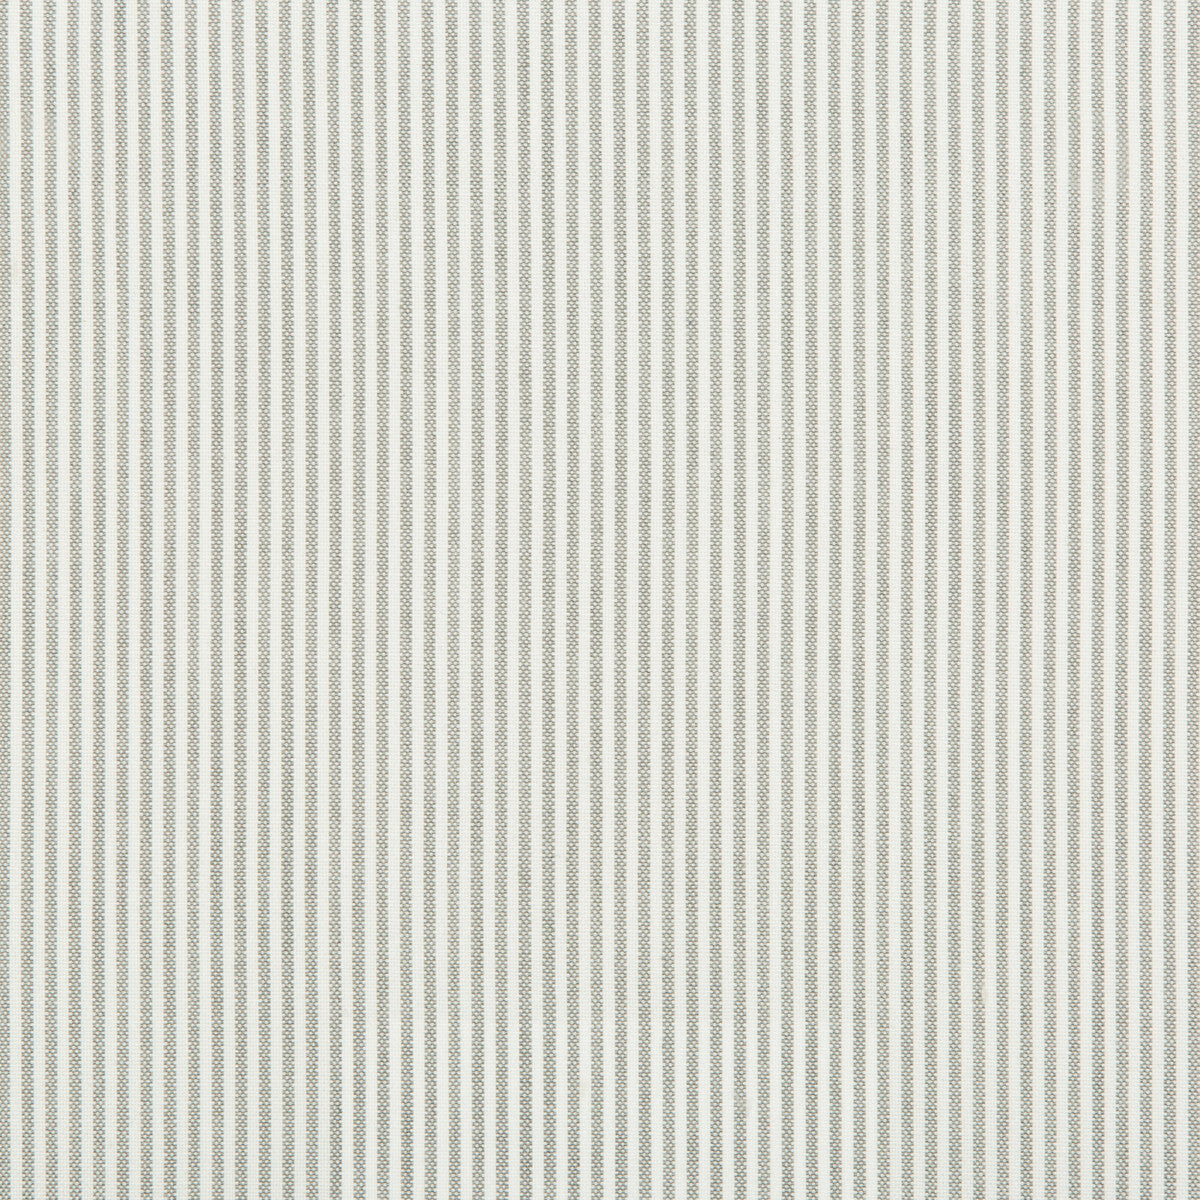 Kravet Basics fabric in 35374-11 color - pattern 35374.11.0 - by Kravet Basics in the Performance Indoor Outdoor collection